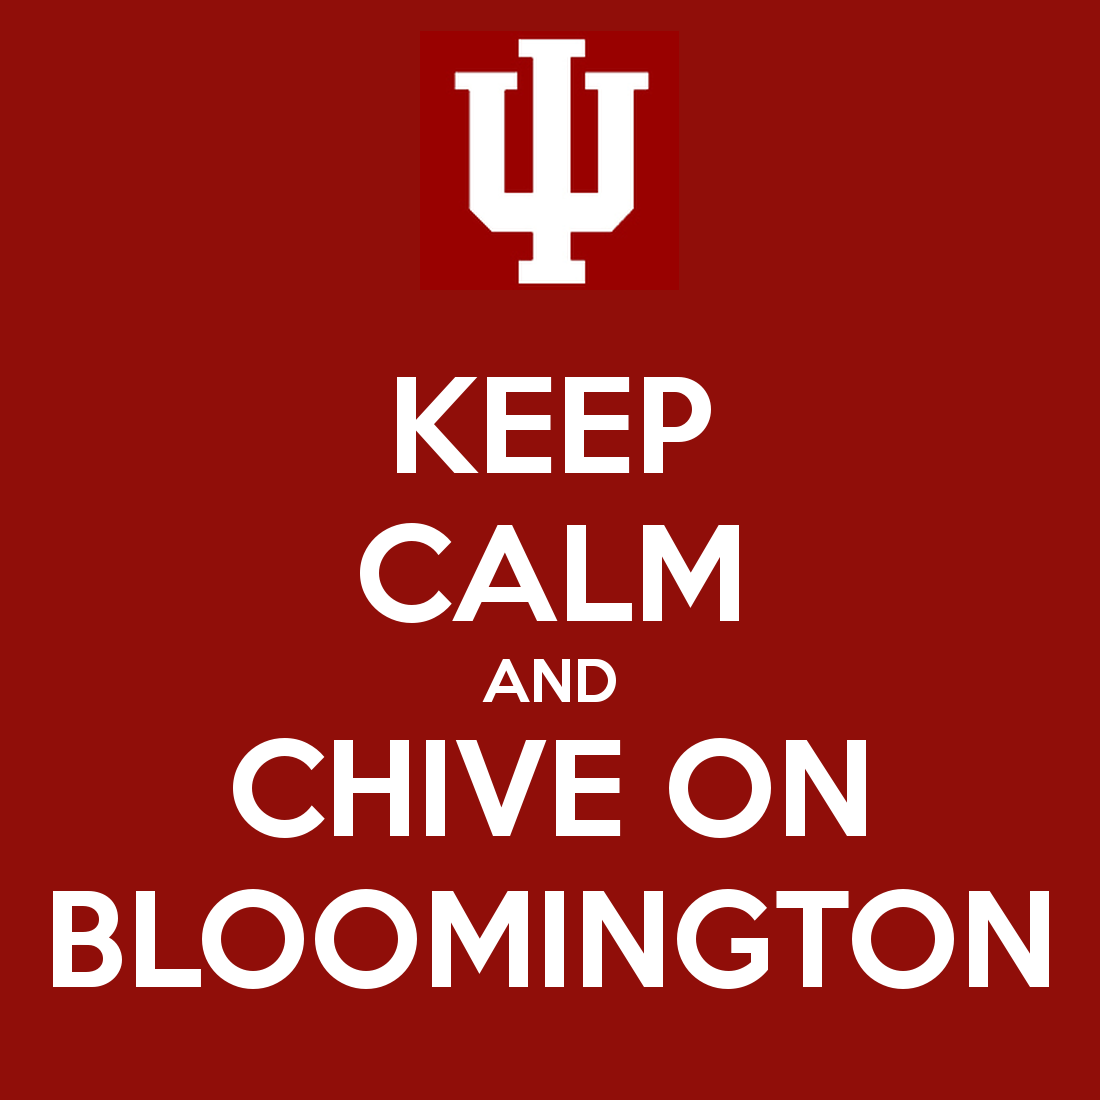 KEEP CALM AND CHIVE ON BLOOMINGTON   KEEP CALM AND CARRY ON Image